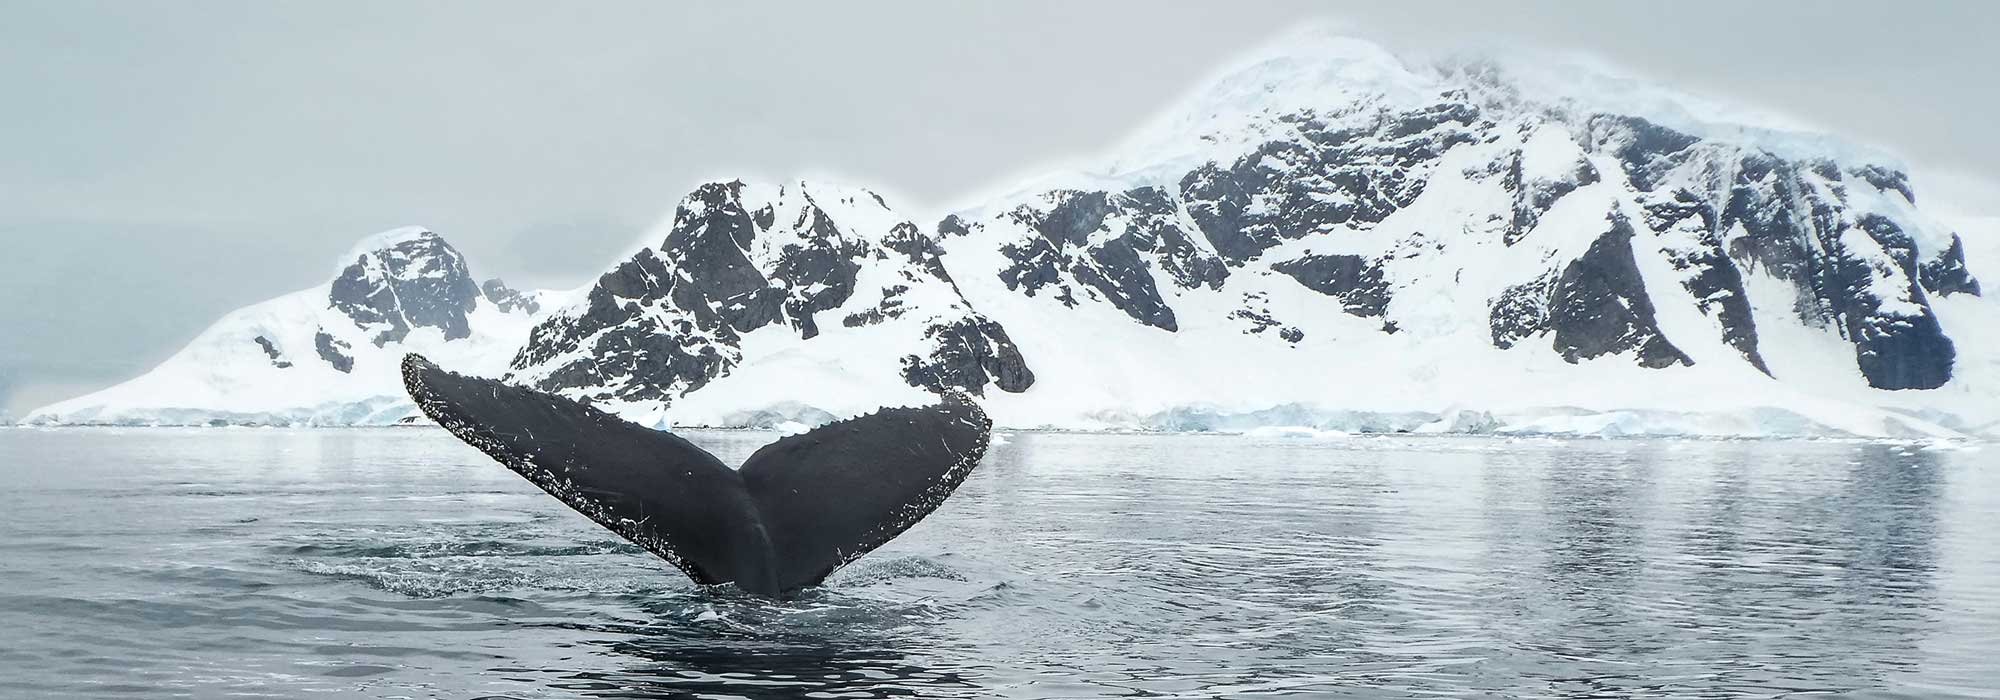 Whale tail, Antarctica